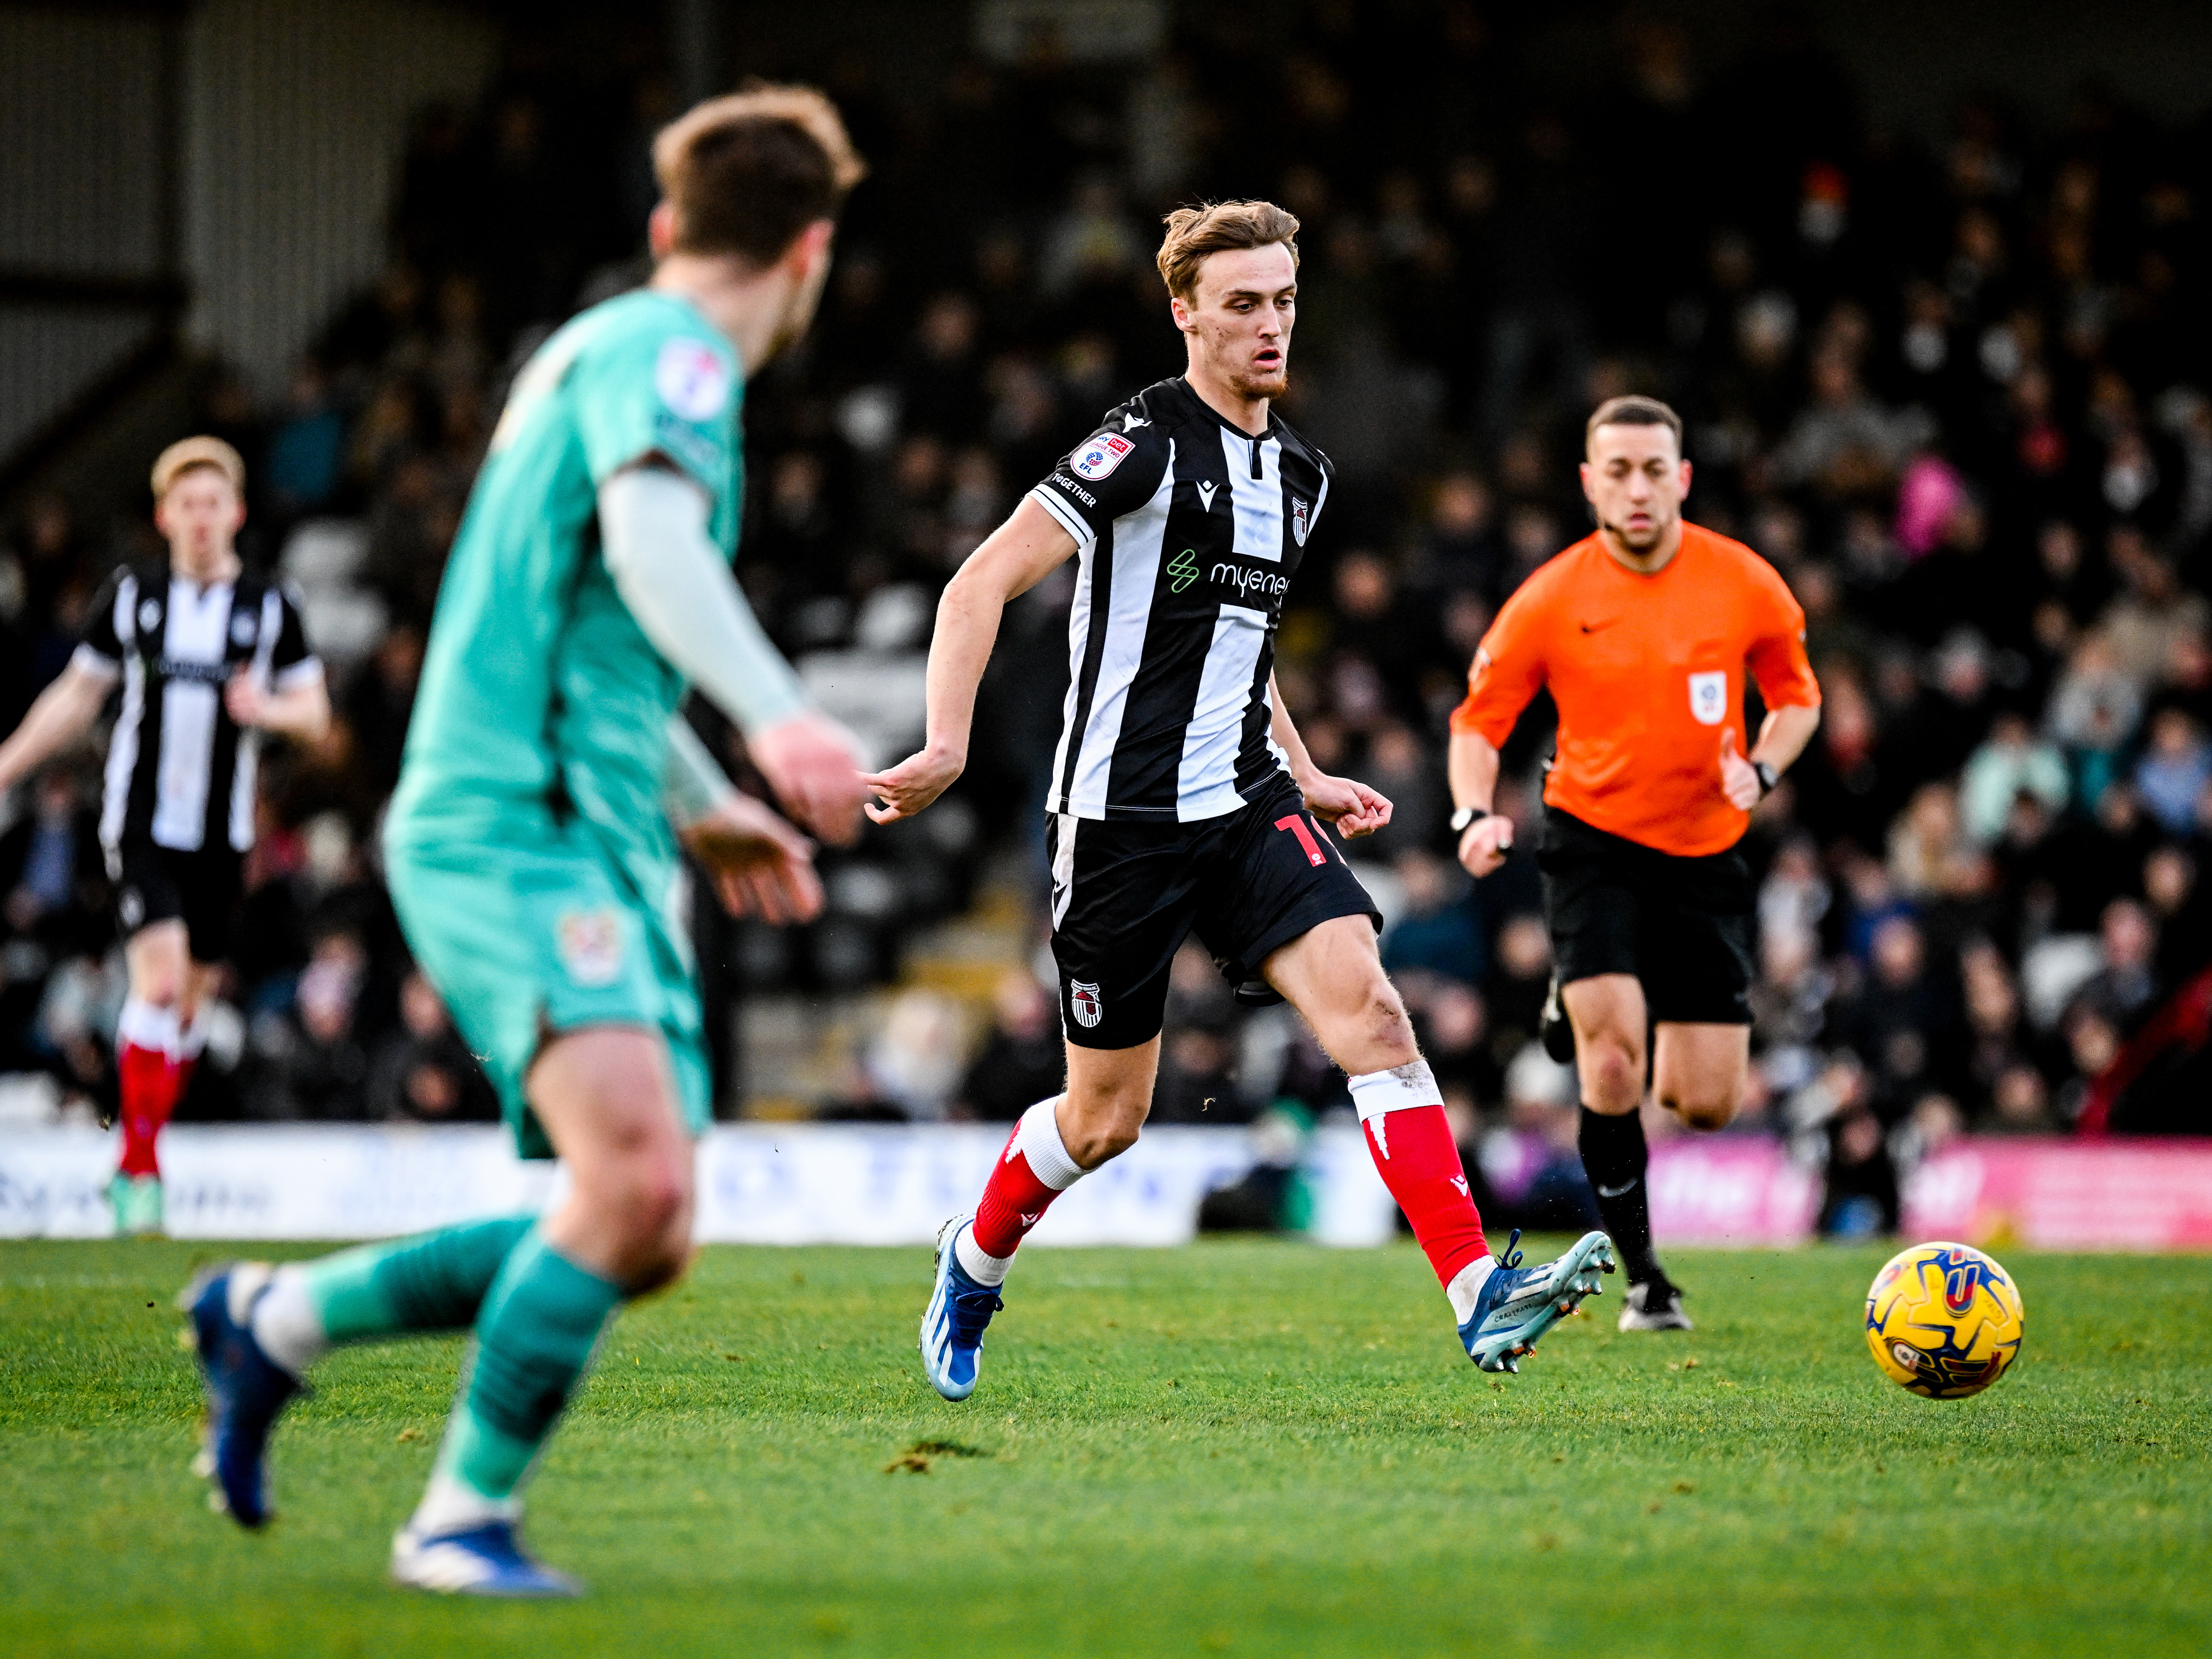 A photo of Jamie Andrews in action for loan club Grimsby Town